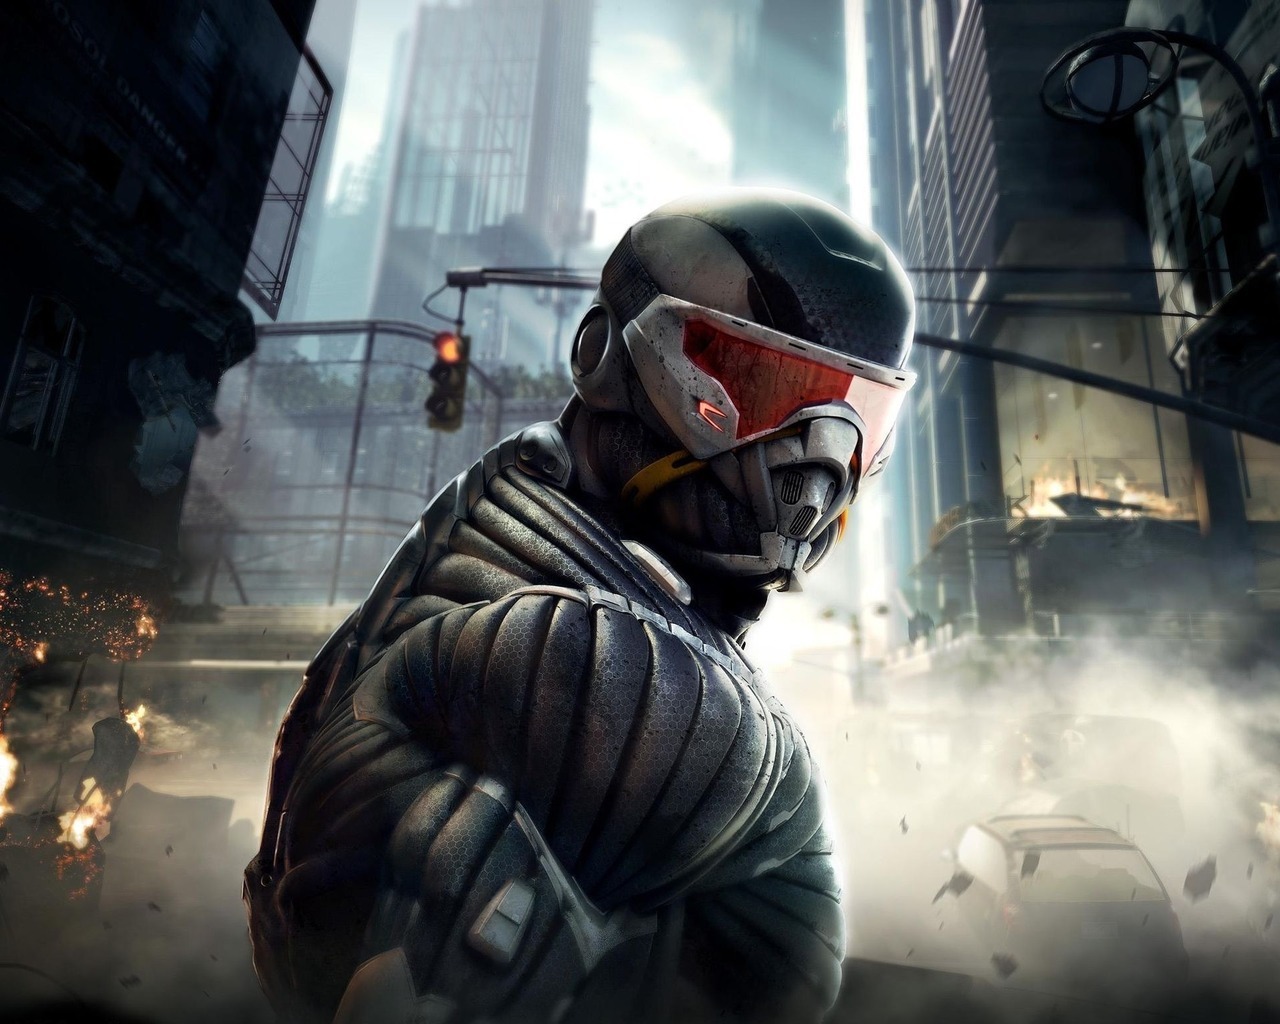 12197 Screensavers and Wallpapers Crysis for phone. Download crysis, games pictures for free